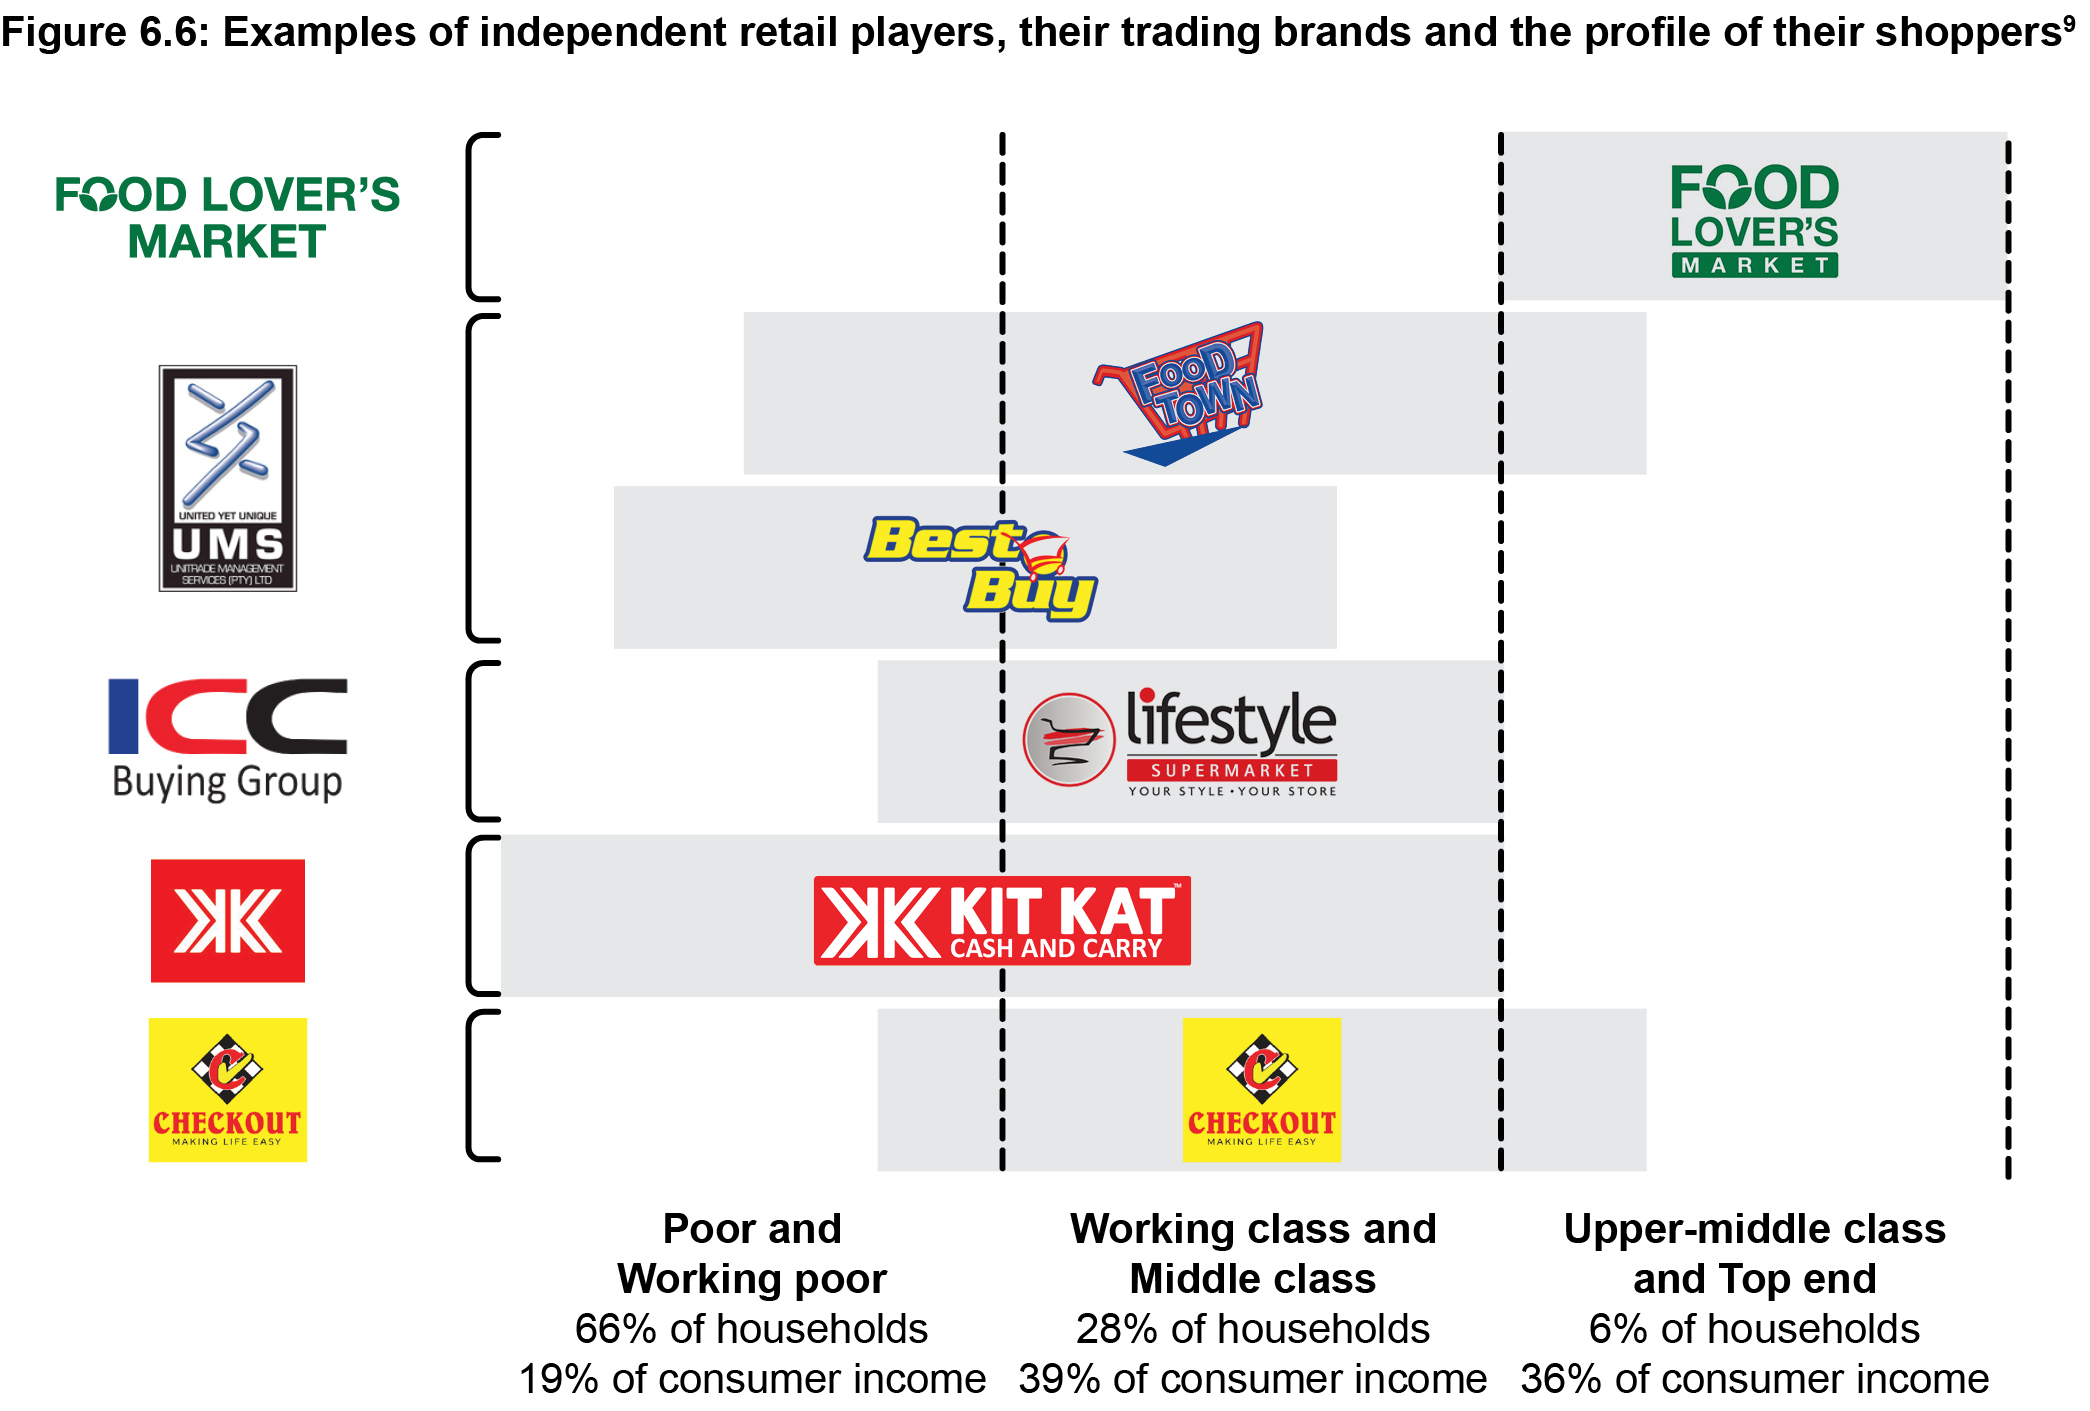 Figure 6.6: Examples of independent retail players, their trading brands and the profile of their shoppers